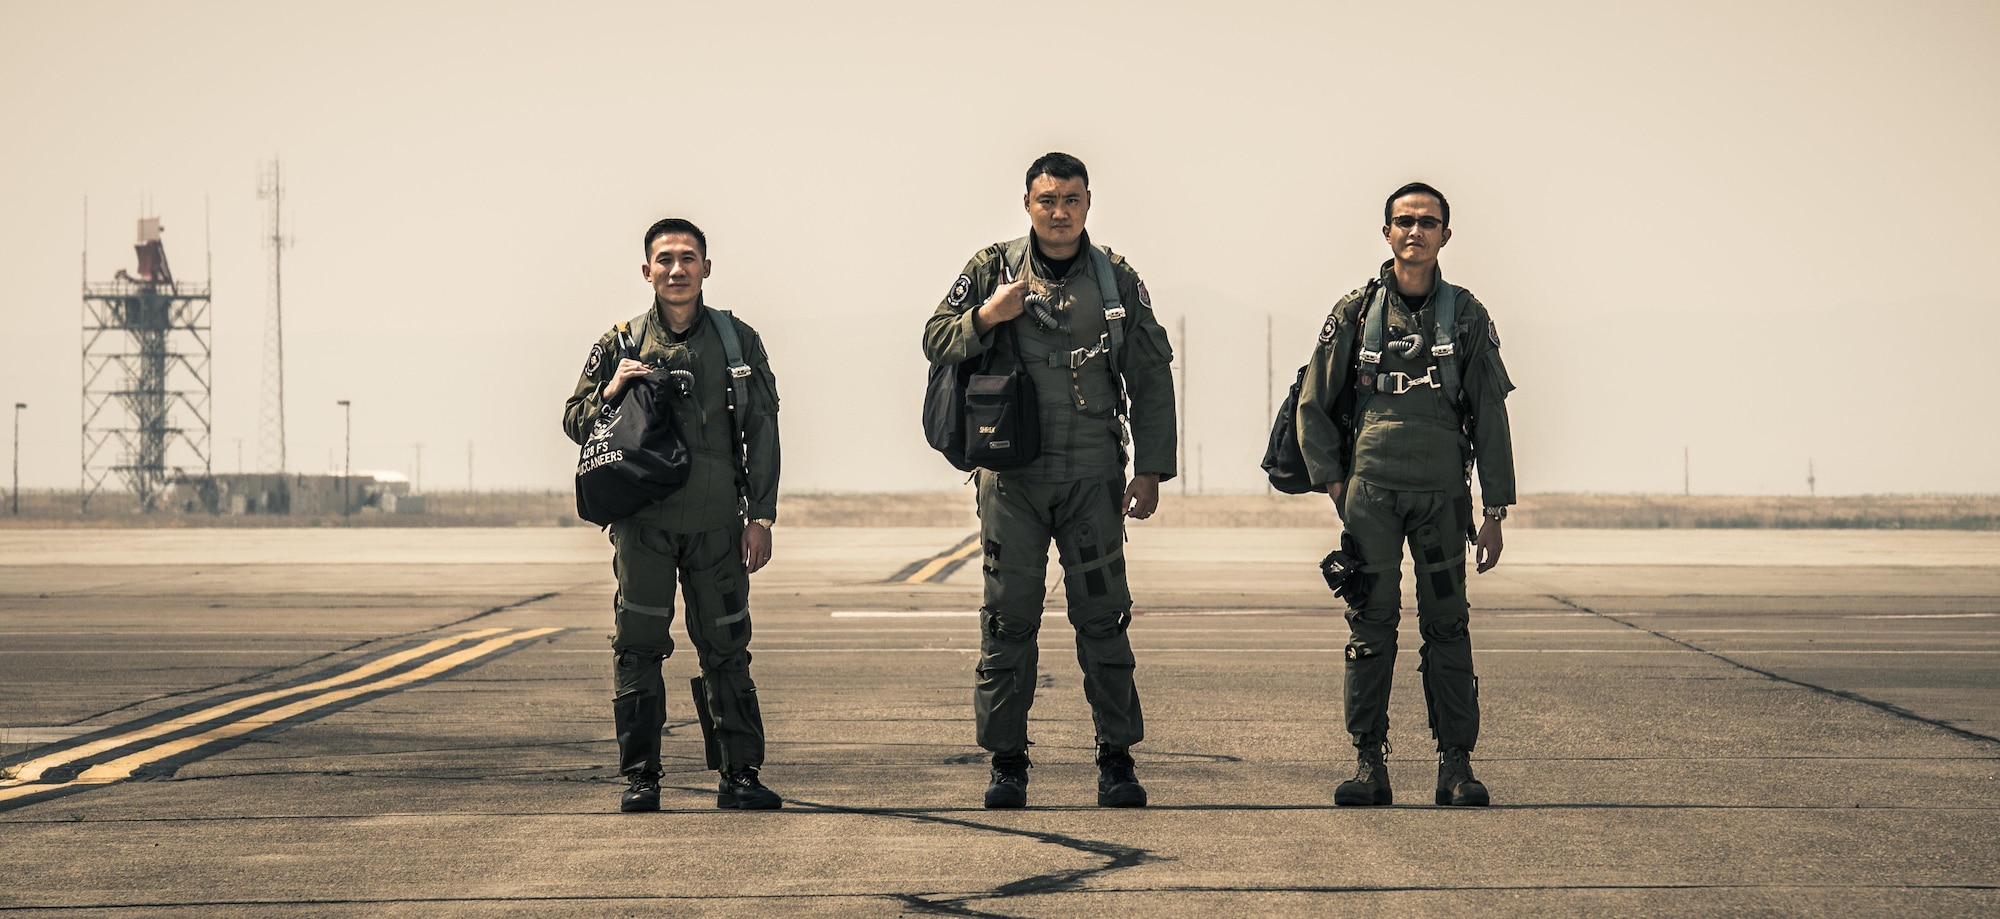 From the left, Republic of Singapore Air Force Weapons Systems Officers Capt. Alex Ong and Capt. Chia Chi Yu and F-15SG Pilot Maj. Wang Kee Yong stand on the flightline at Mountain Home Air Force Base, Idaho. The three are the first to graduate the RSAF Fighter Weapons Instructor Course, modeled after the U.S. Air Force Fighter Weapons School program. (U.S. Air Force photo by Senior Airman Lauren-Taylor Levin)